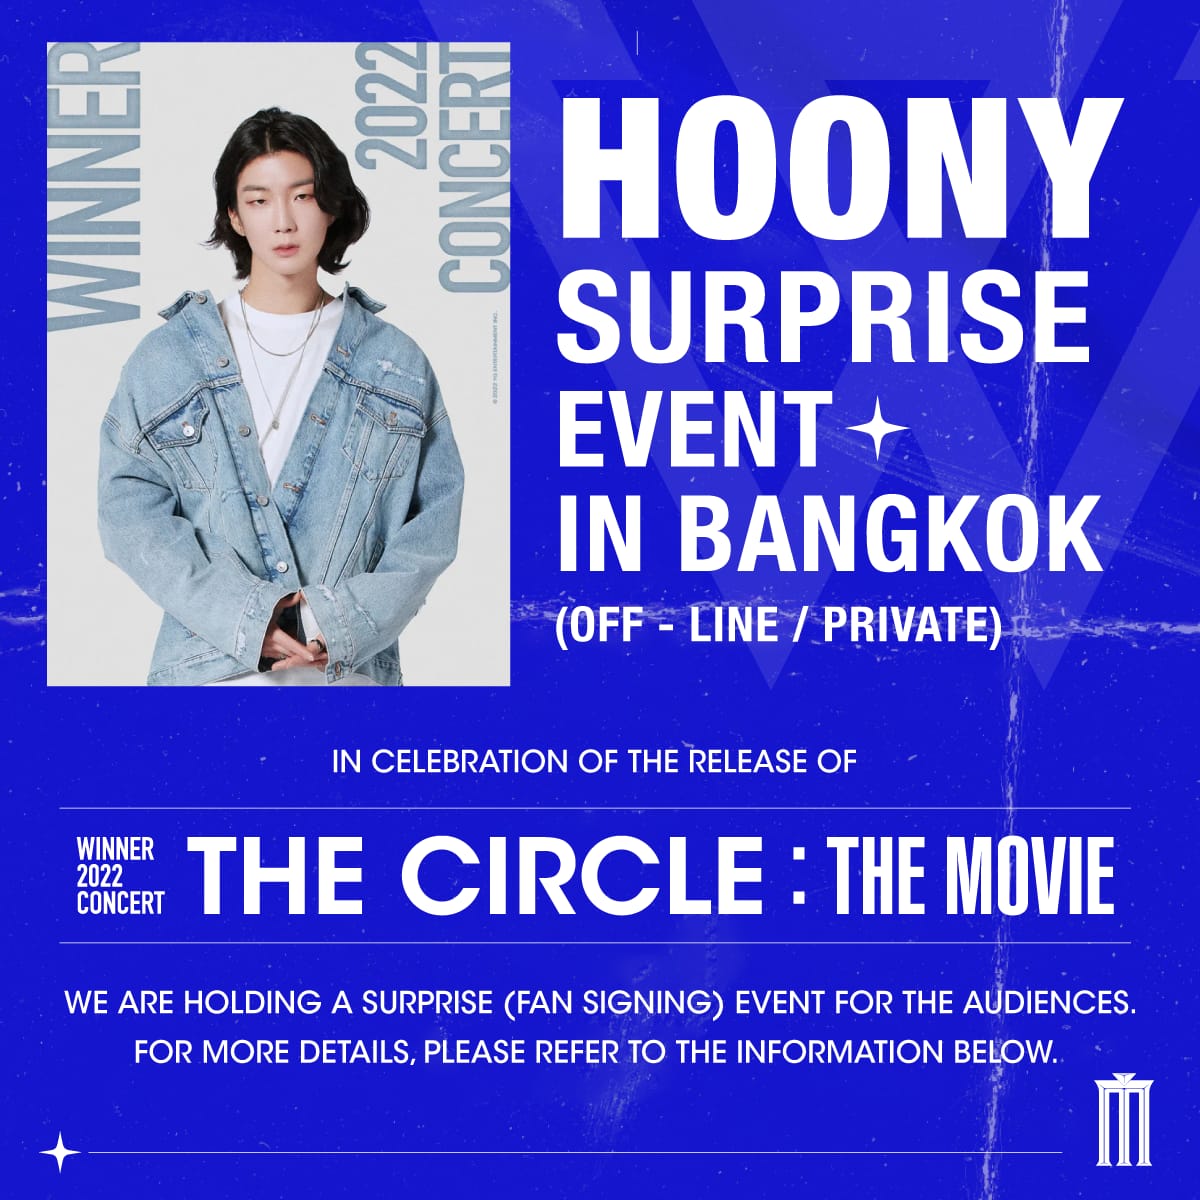 Image for [THE CIRCLE : THE MOVIE] HOONY SURPRISE EVENT in BANGKOK Announcement Apply Here ▶️https://t.co/bGw30J1XaR WINNER HOONY Lee Seung-hoon Winner the Movie Winner 2022 Concert the Circle the Movie WINNER2022 CONCERTTHECIRCLETHEMOVIE SURPRISE_EVENT YG https://t.co/ DTHaZH653e